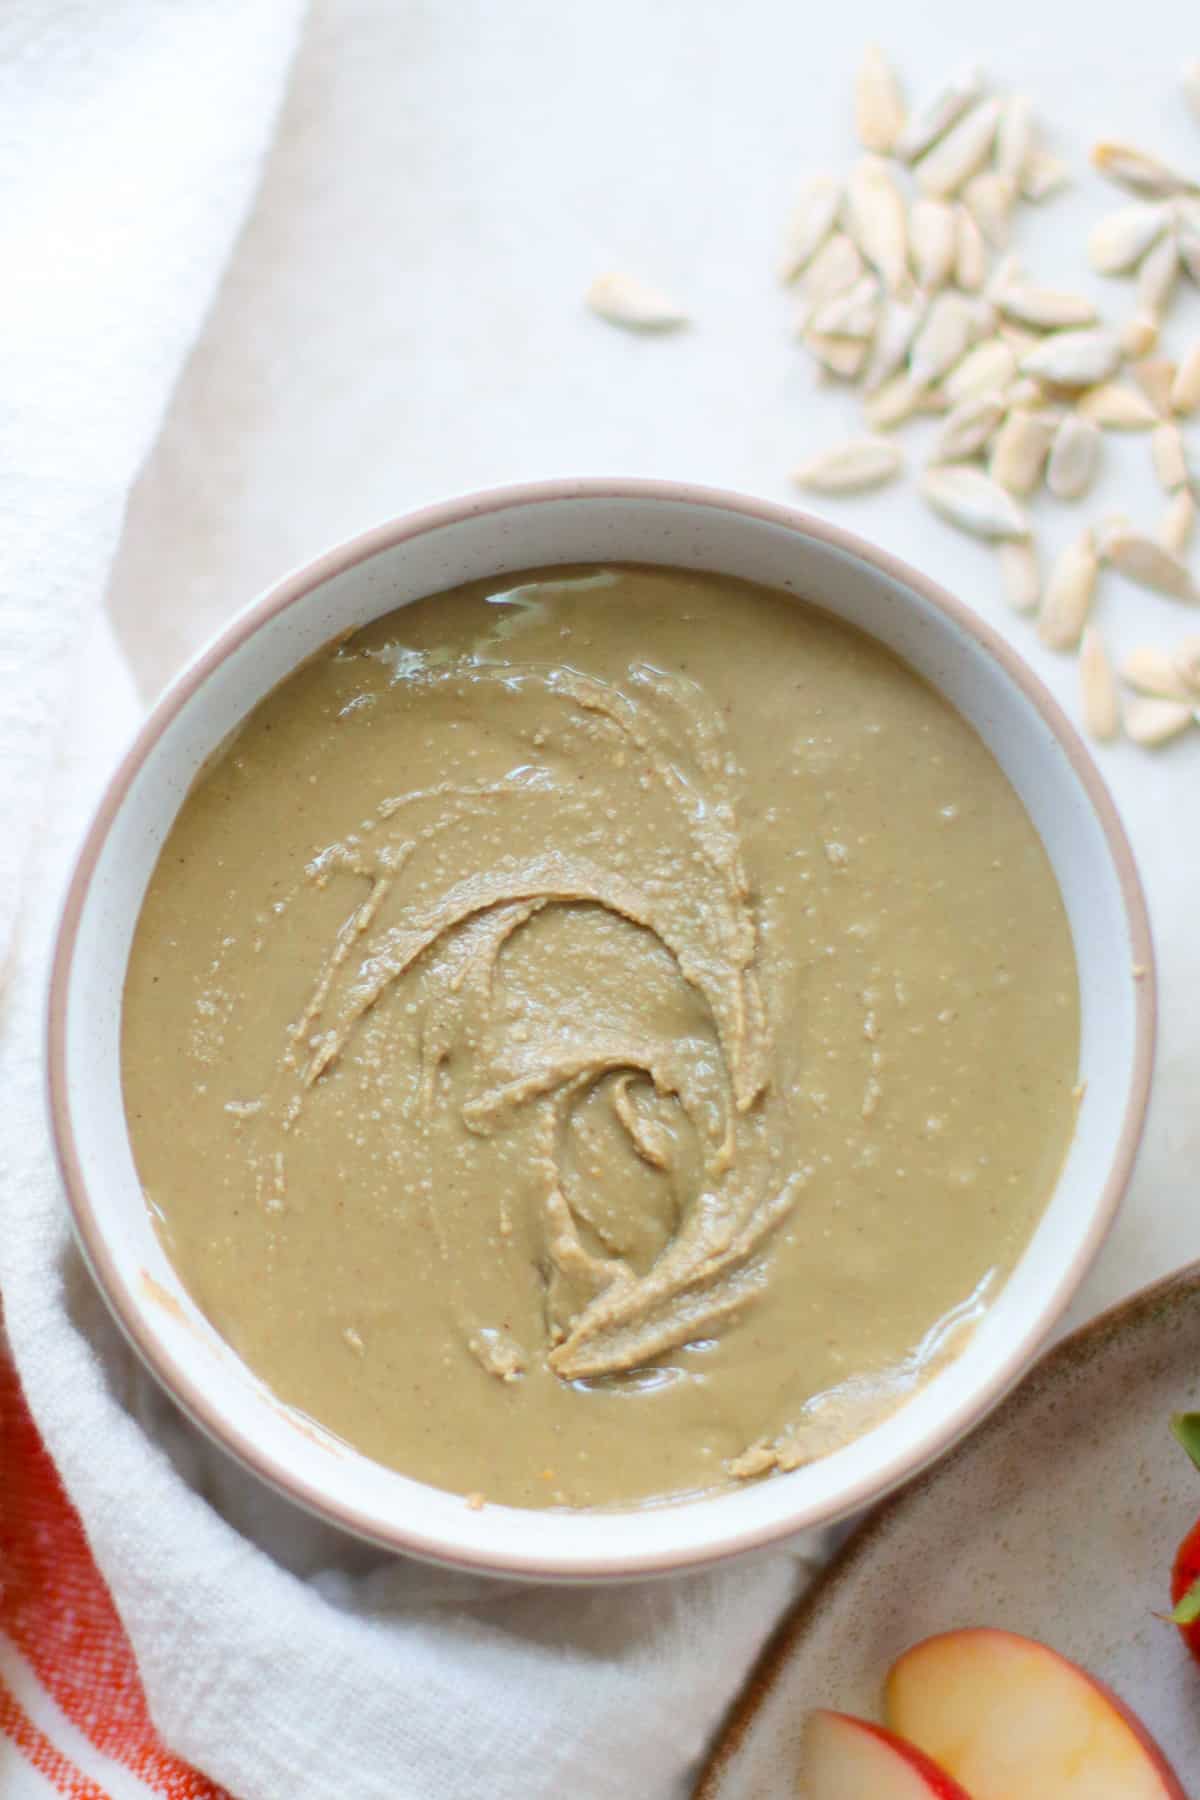 Creamy sunflower seed butter in a bowl.